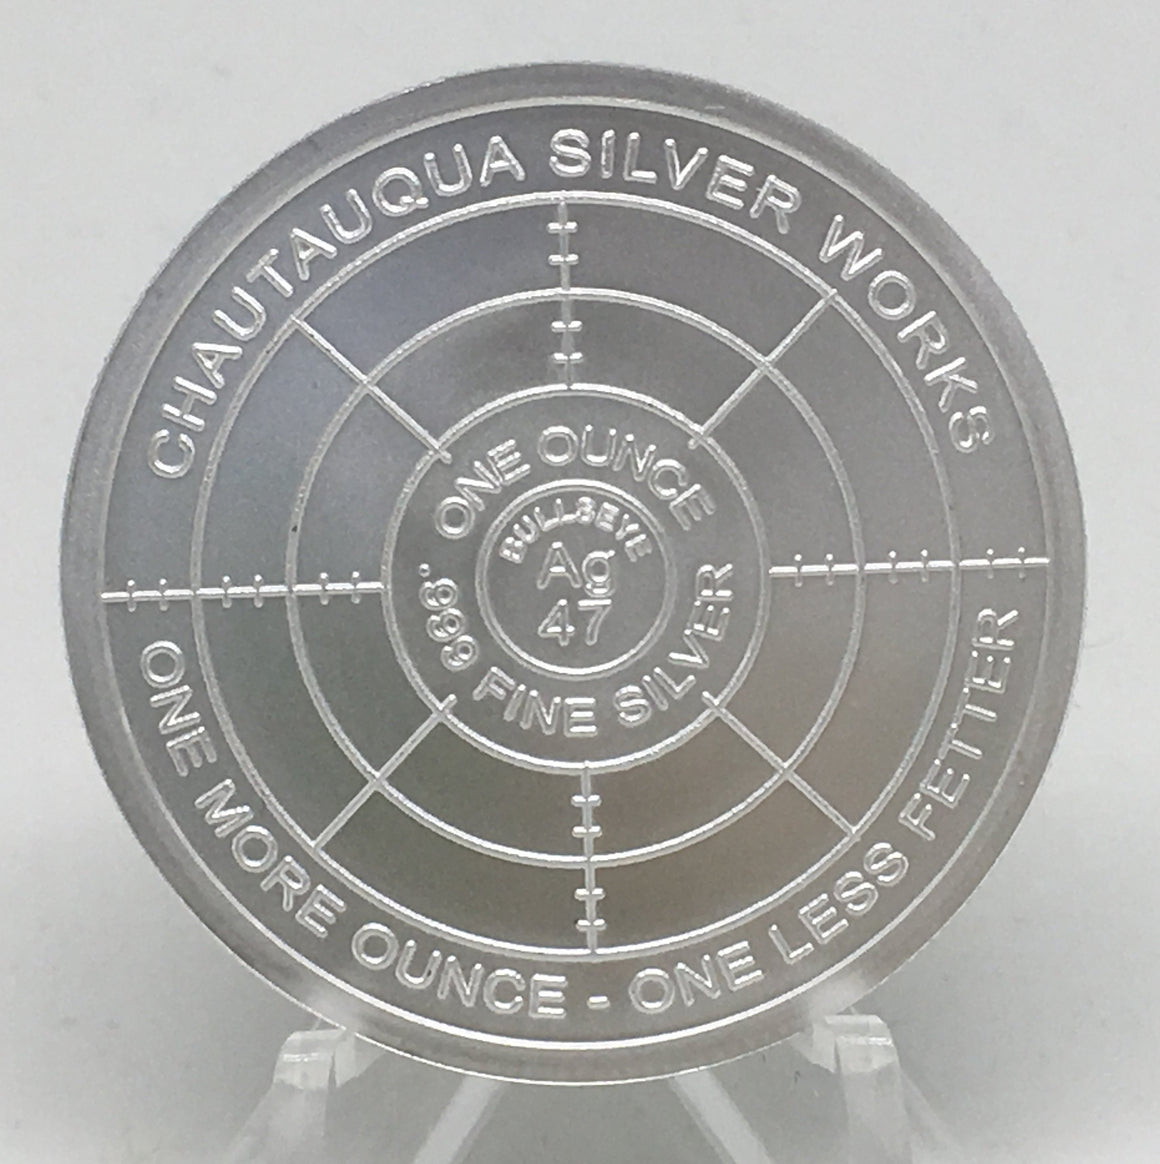 Cryptic Silver Series #4 - Cryptic History, BU Finish by Chautauqua Silver Works, 1oz .999 Silver Round.